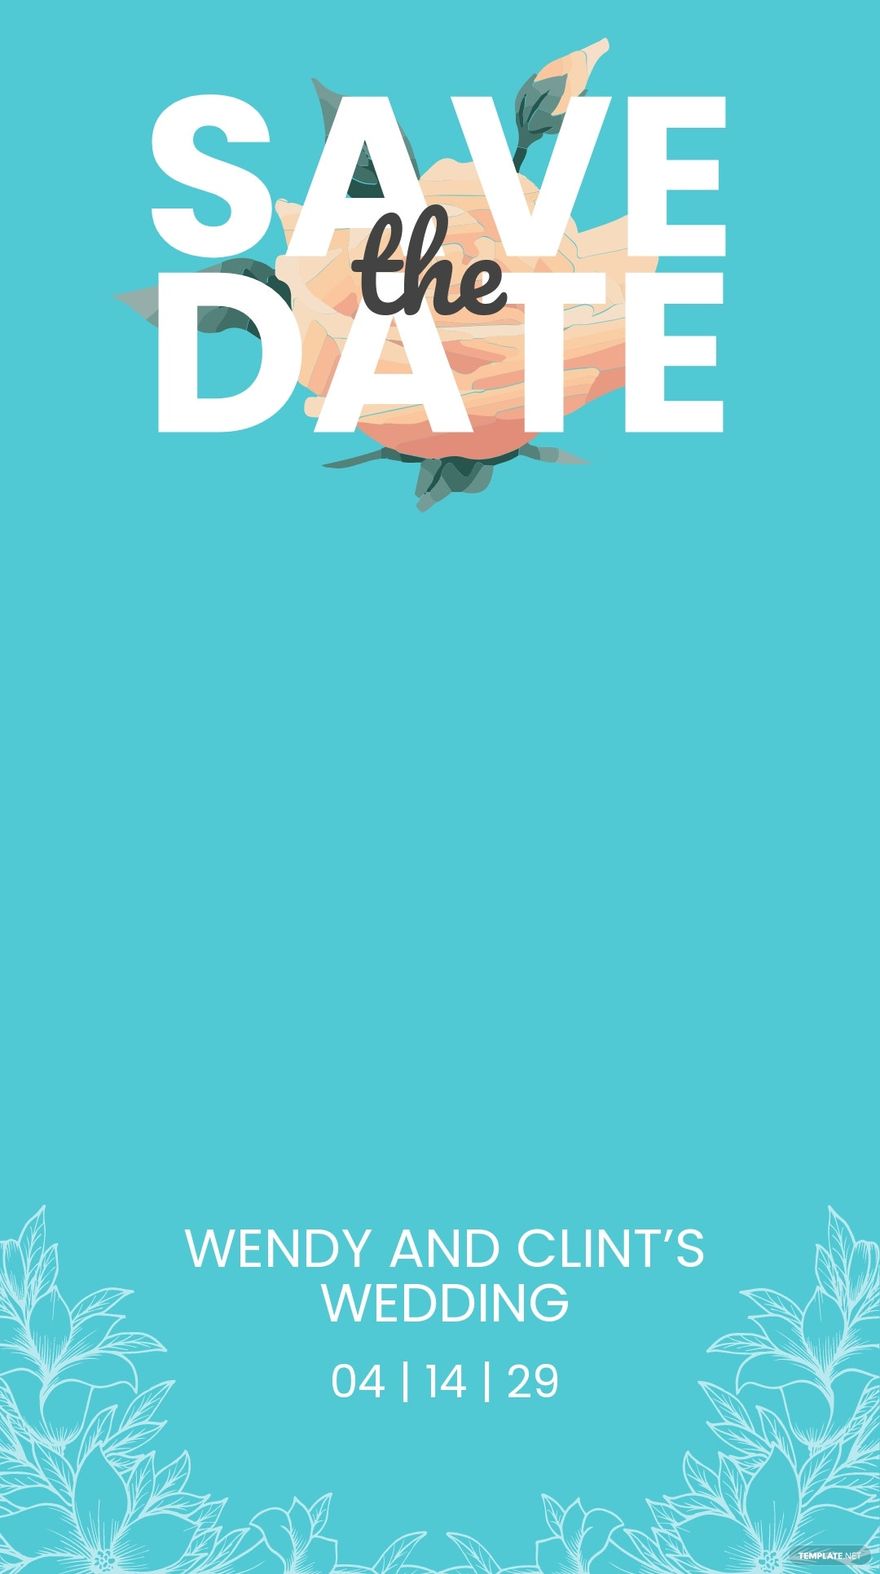 Wedding Save The Date Snapchat Geofilter Template.jpe